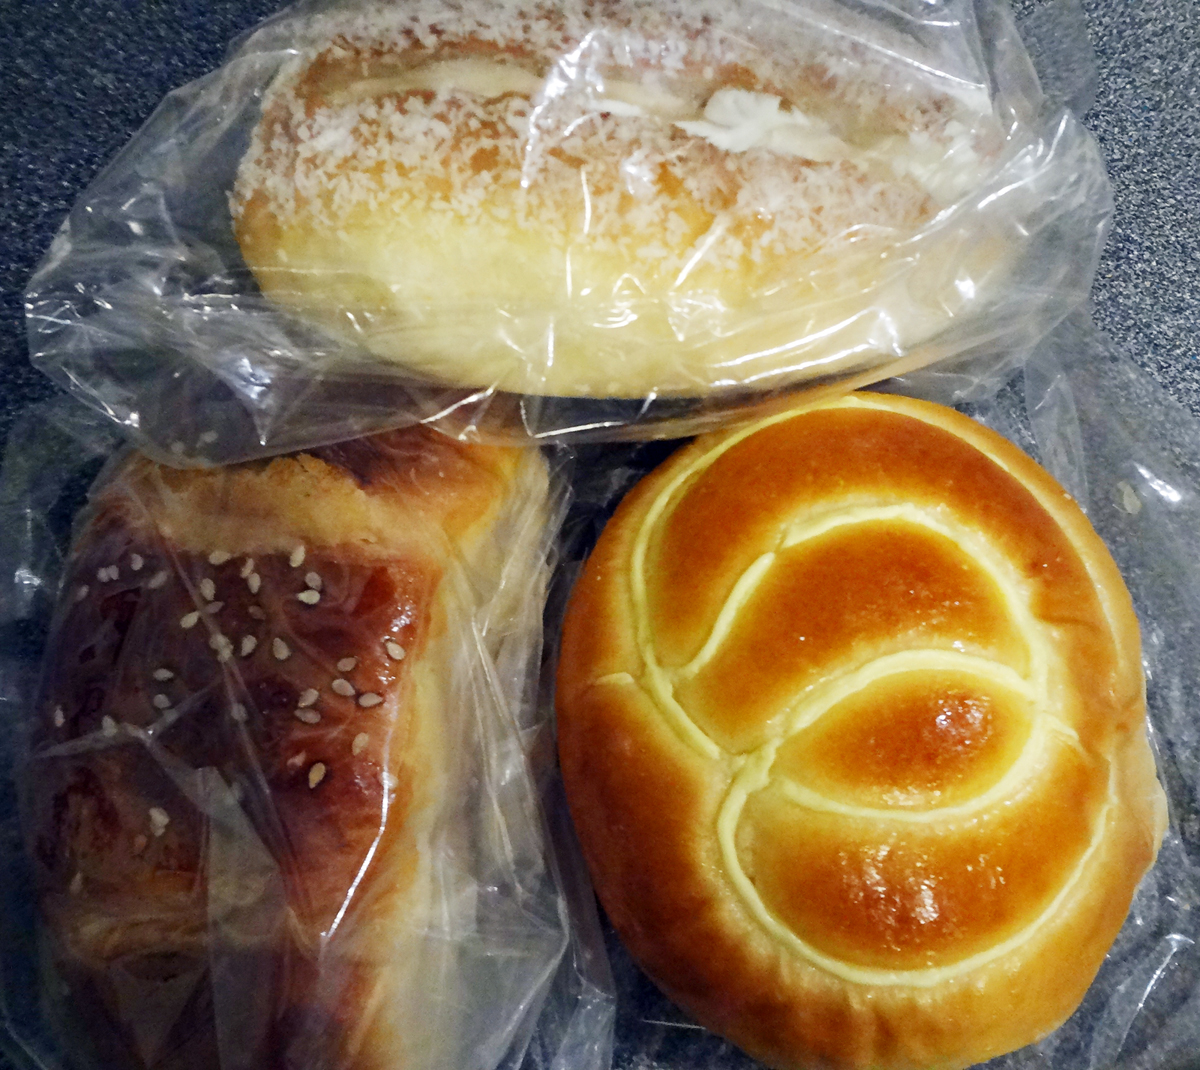 Assorted baked good from Mastery Bakery